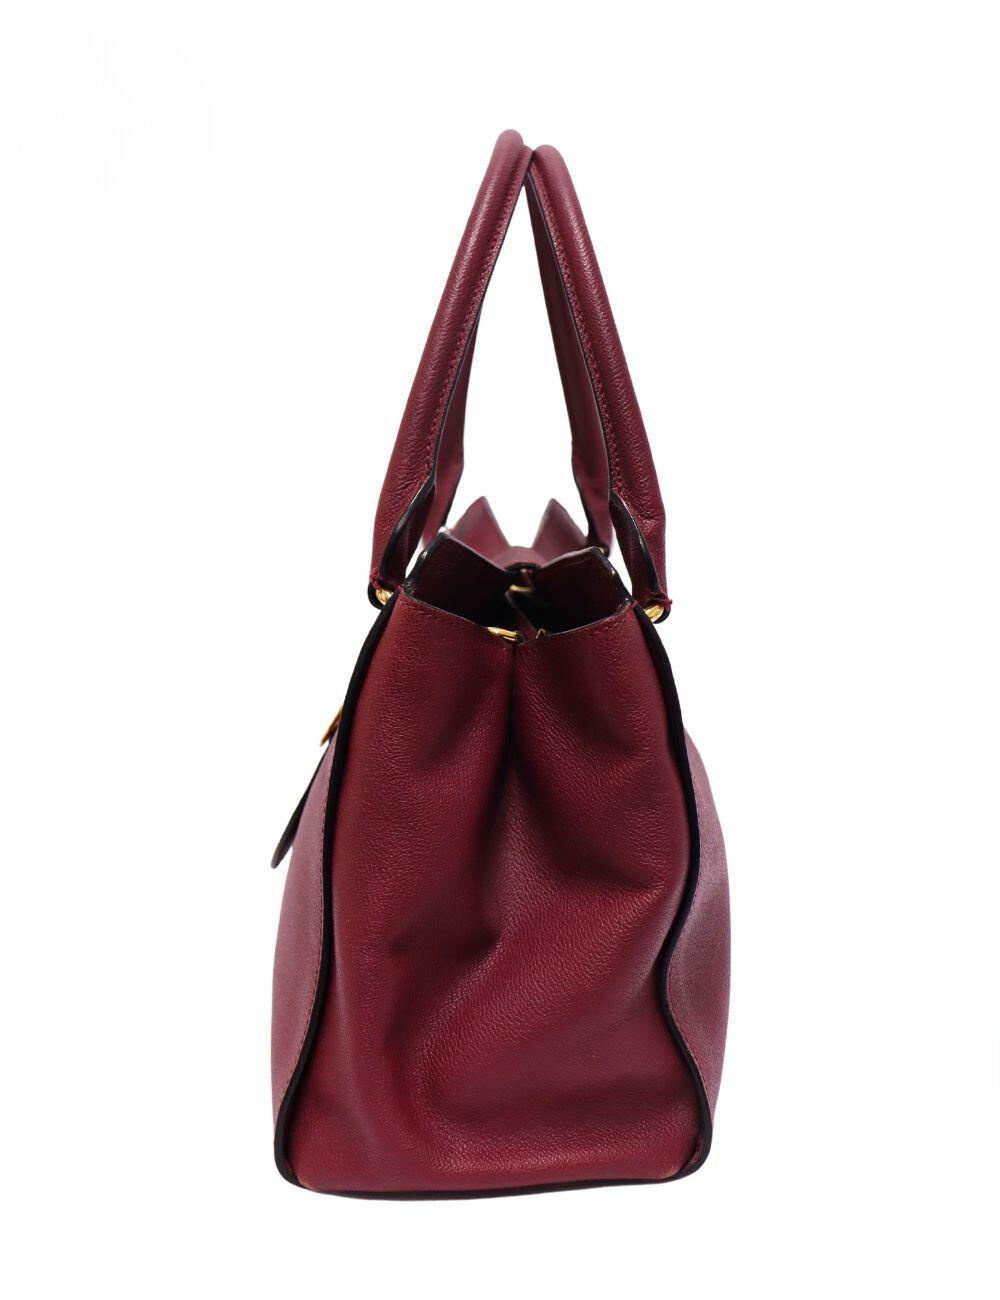 Burberry Medium Maroon Buckle Tote In Fair Condition For Sale In Amman, JO